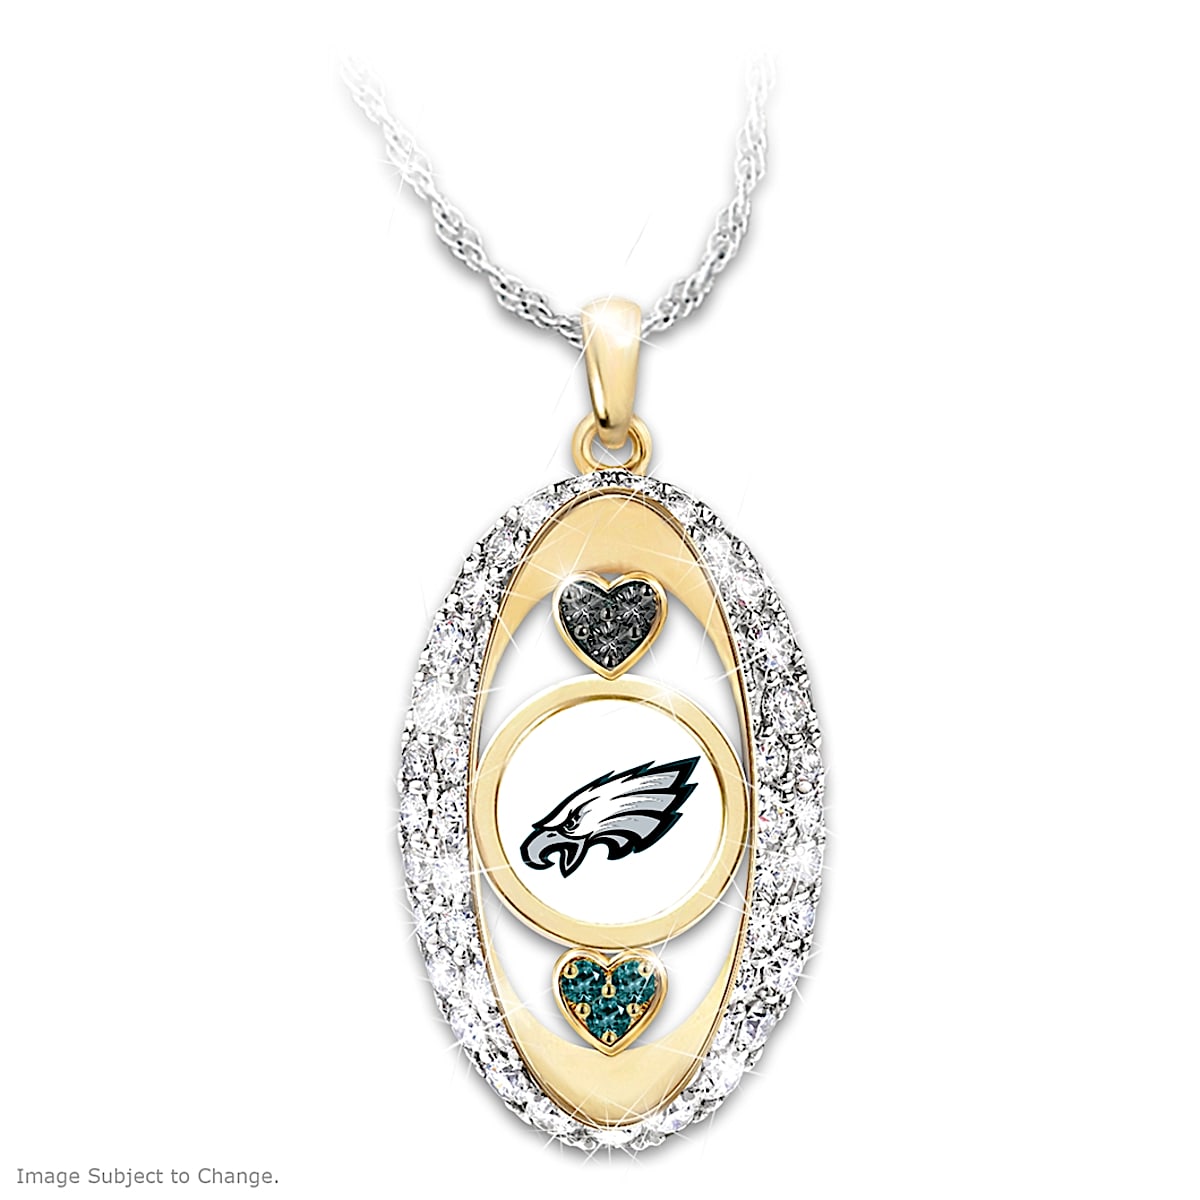 Philadelphia Eagles Written On My Heart NFL Sterling Silver-Plated Pendant  Necklace Featuring A Heart With Team Name And Adorned With Crystal Accents